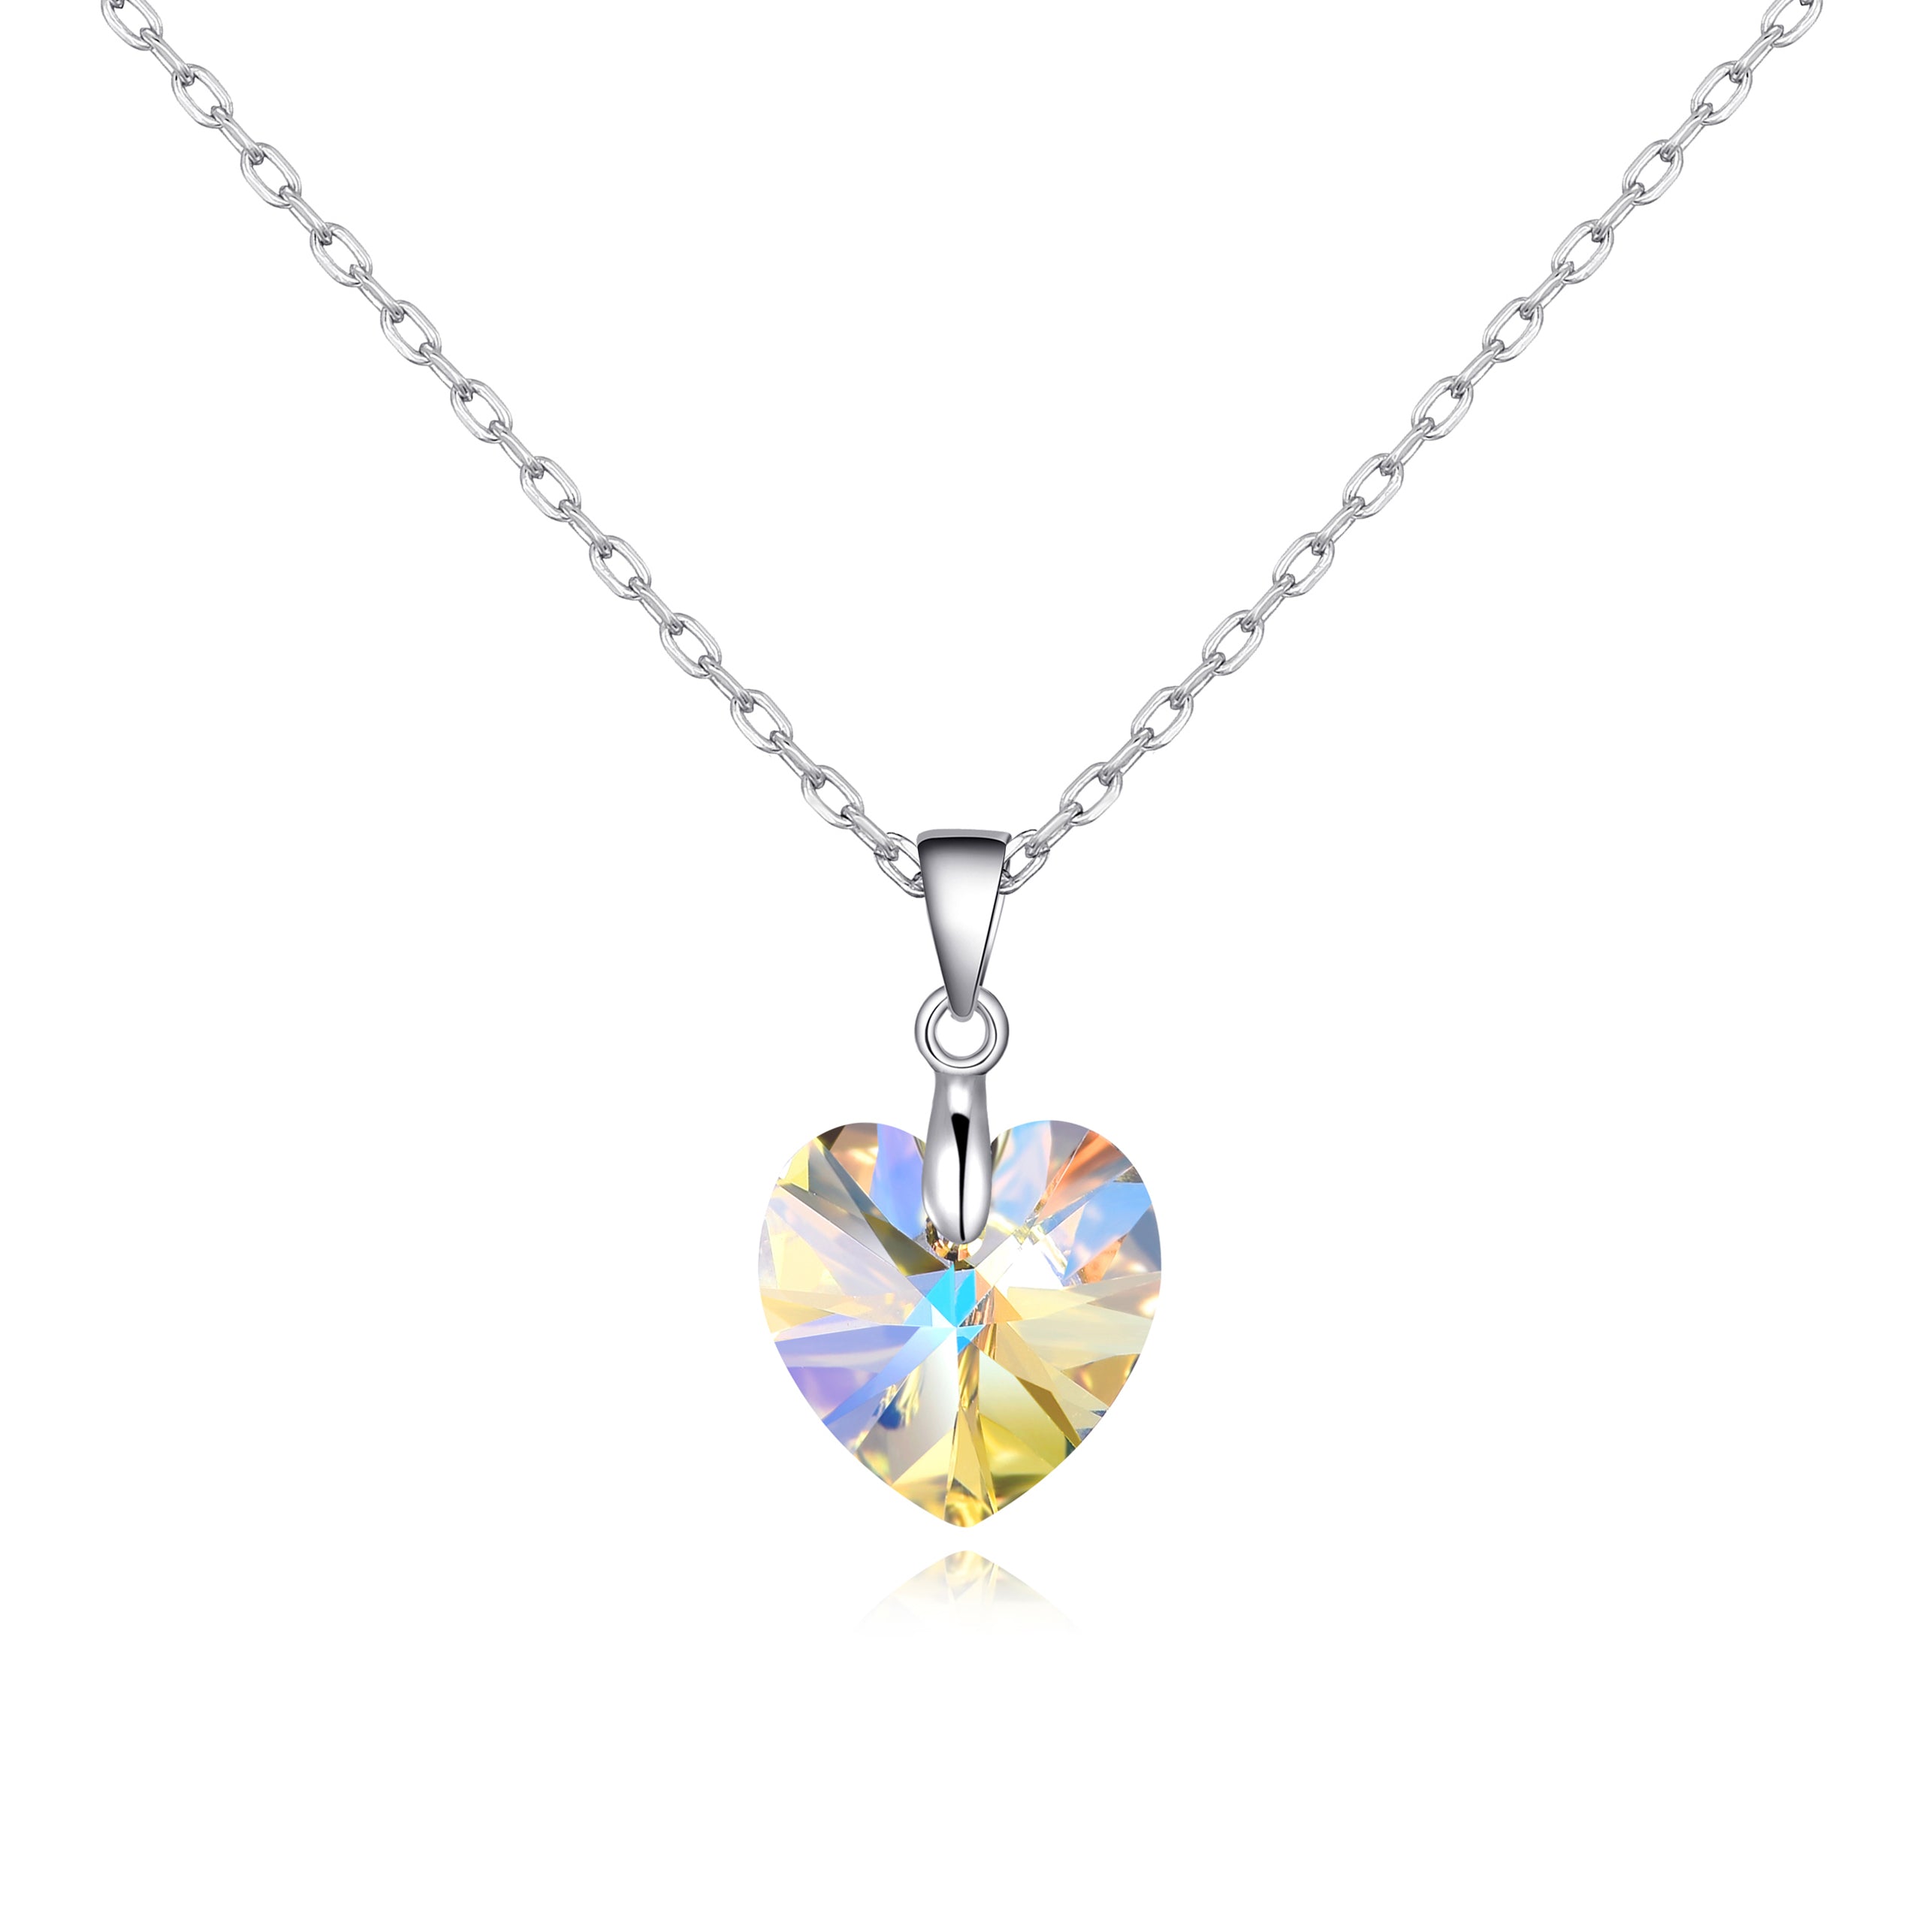 Sterling Silver Aurora Borealis Heart Necklace Created with Zircondia® Crystals by Philip Jones Jewellery